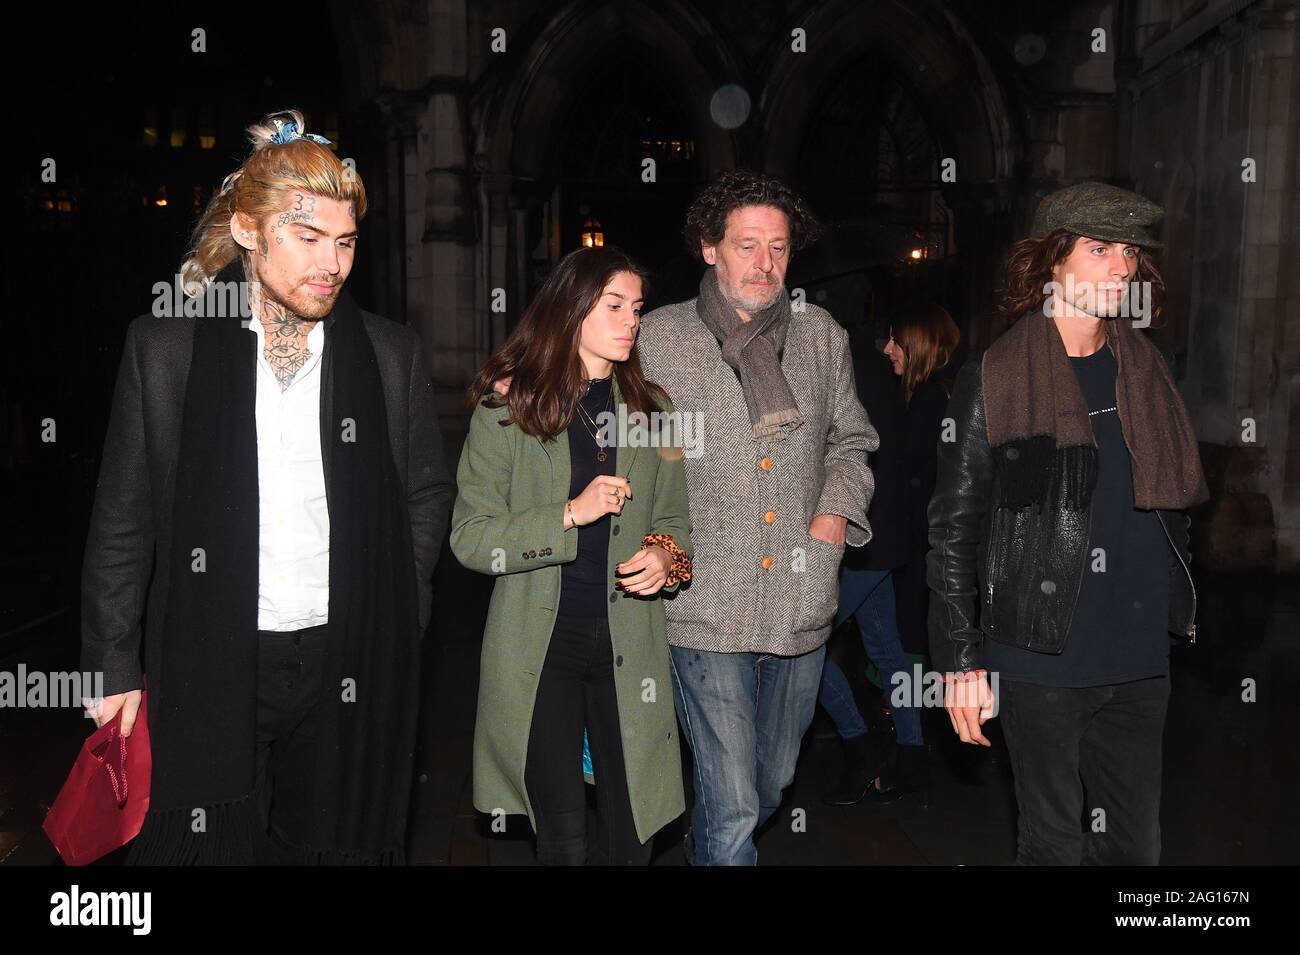 Marco Pierre White (centre right) leaves the Royal Courts of Justice in London accompanied by his children Marco White Jr (left) and Luciano White (right), as the chef and his estranged wife Matilde are embroiled in a High Court row over money. Stock Photo